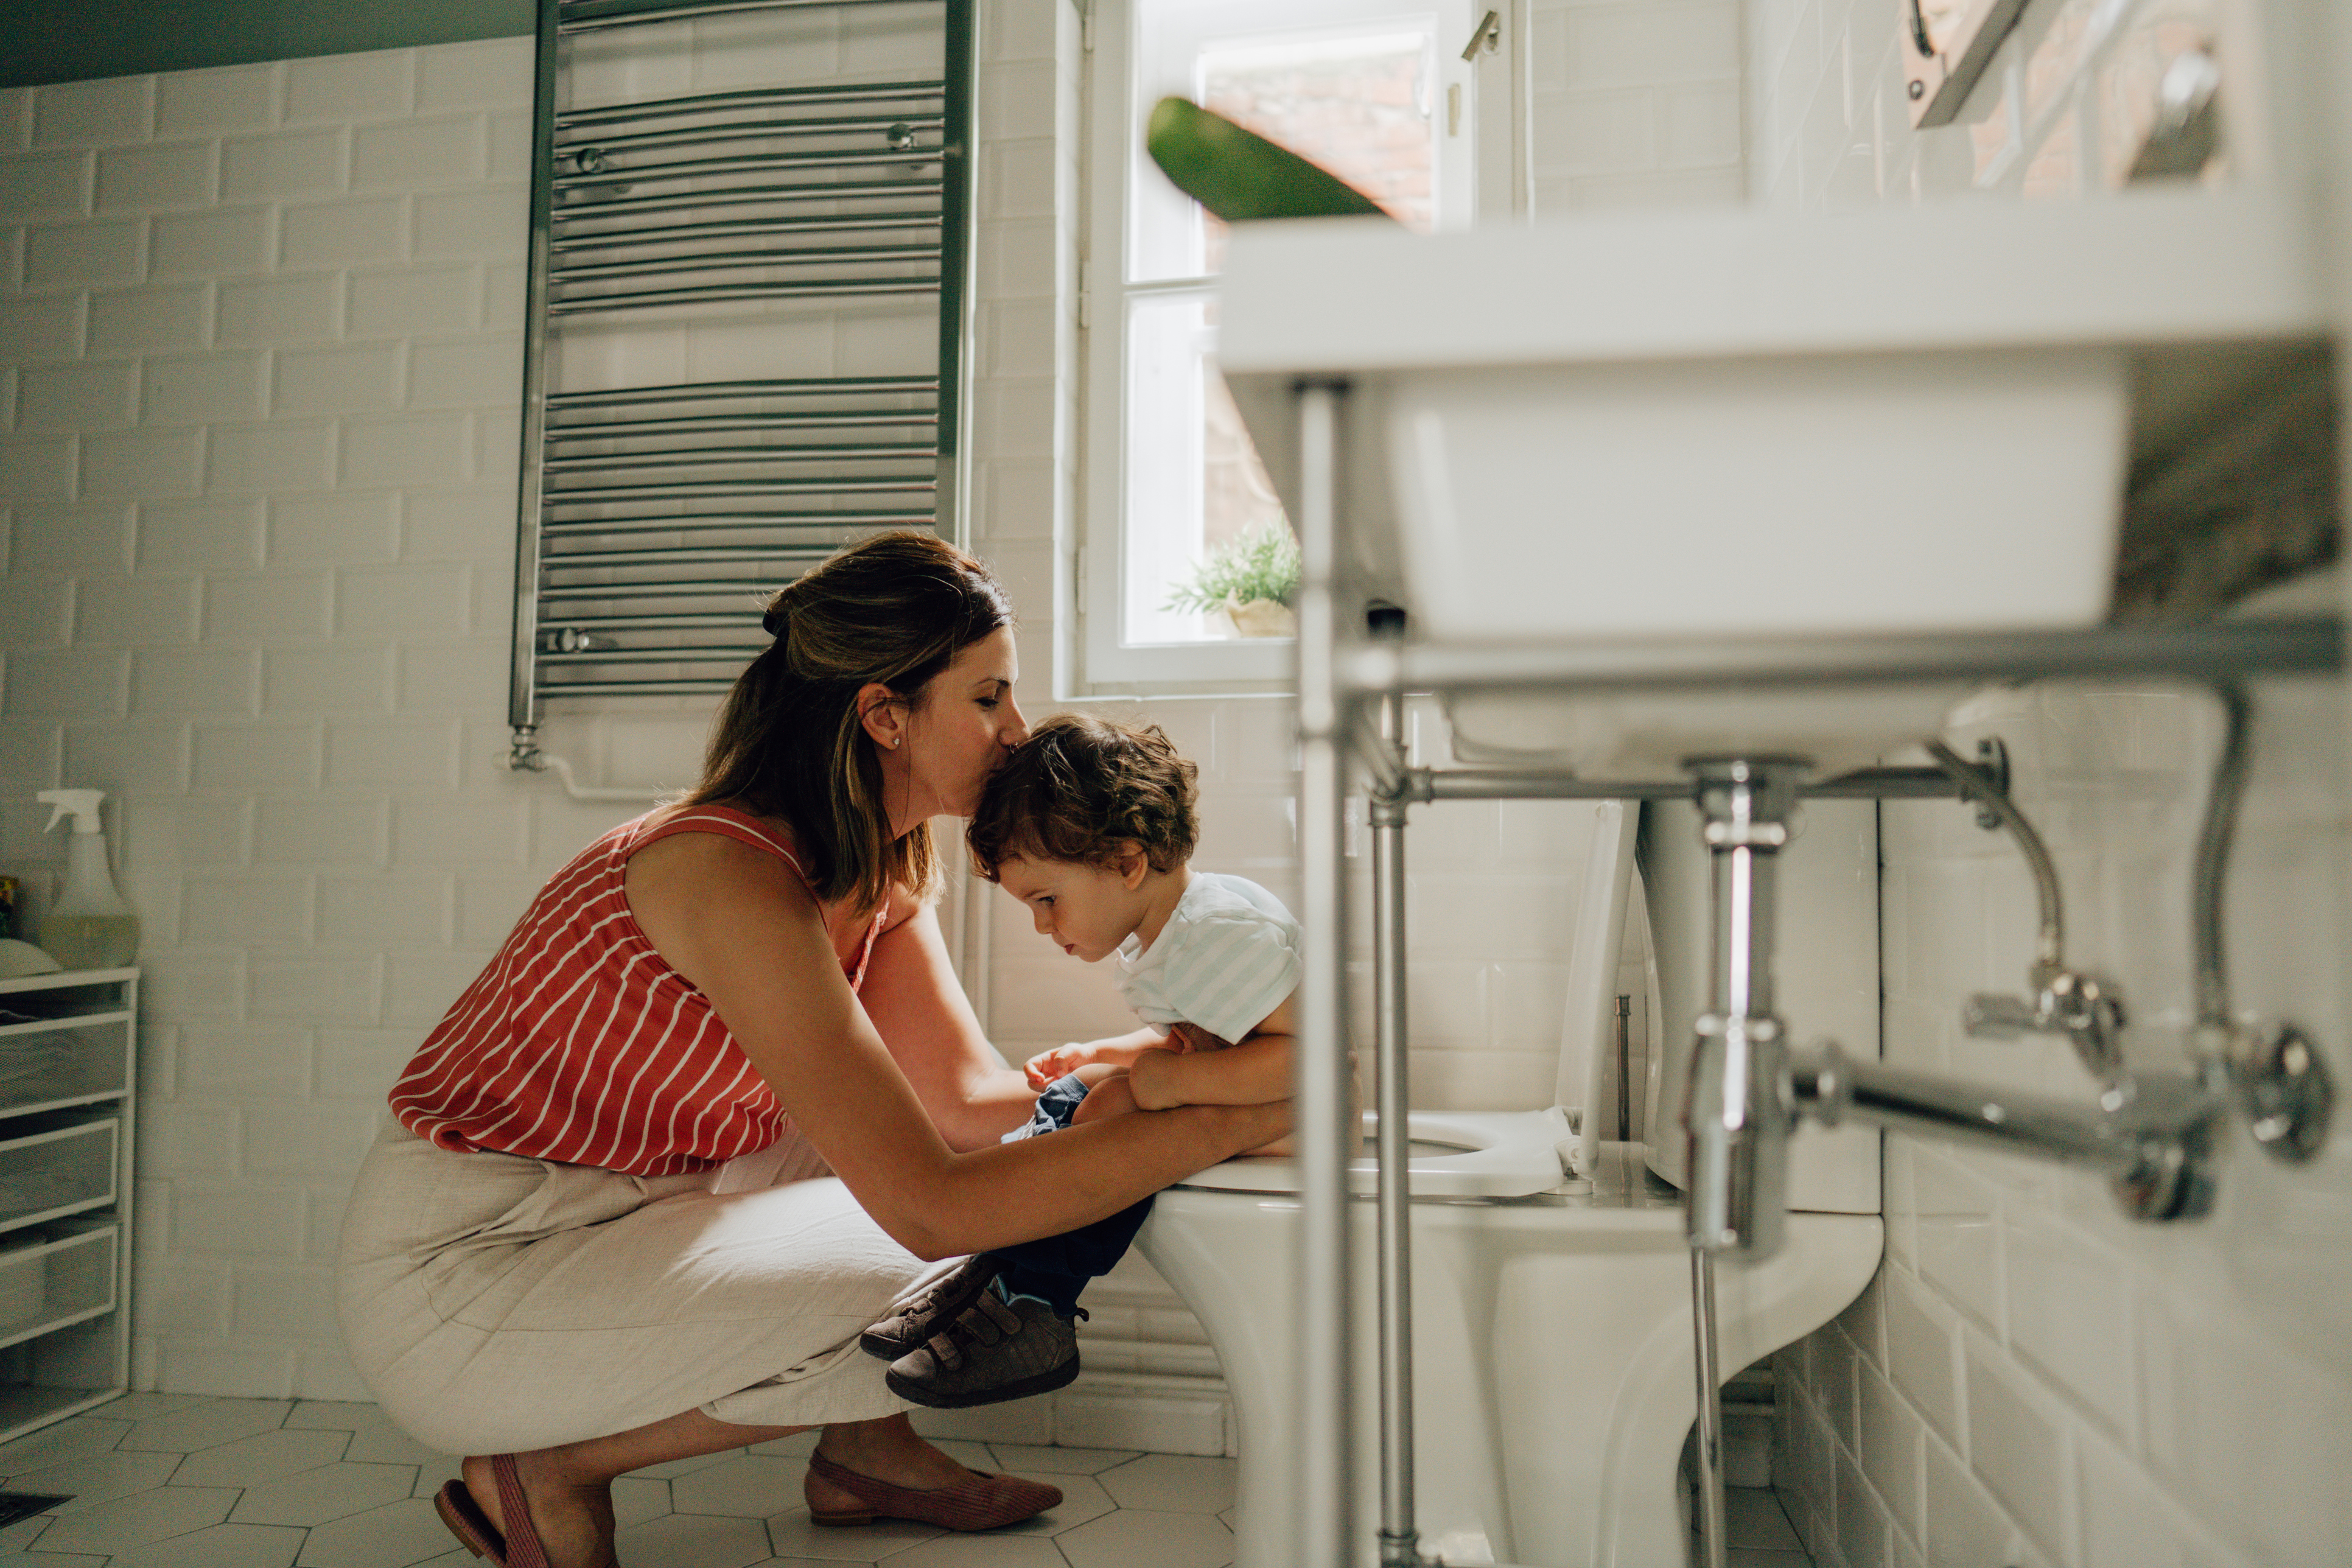 Genius Potty Training Tricks From 'Been There, Done That' Parents